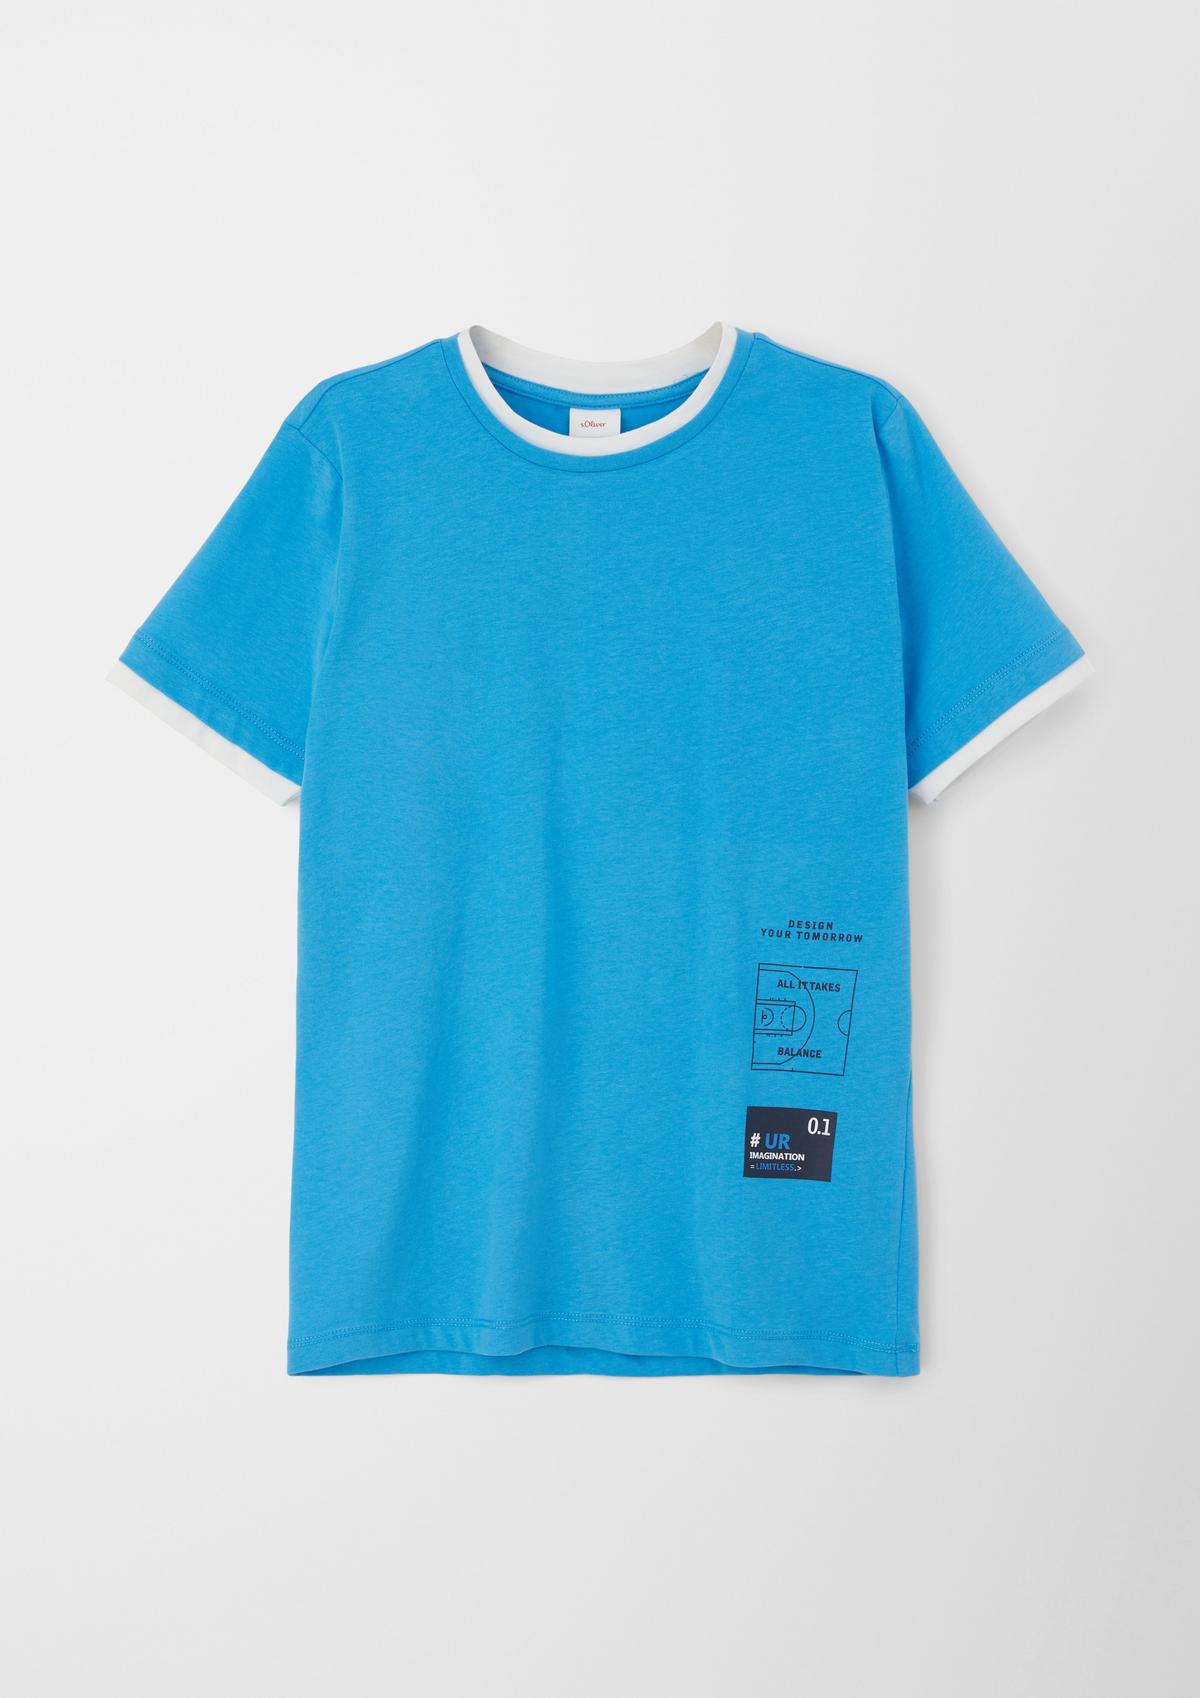 s.Oliver T-shirt with contrast details